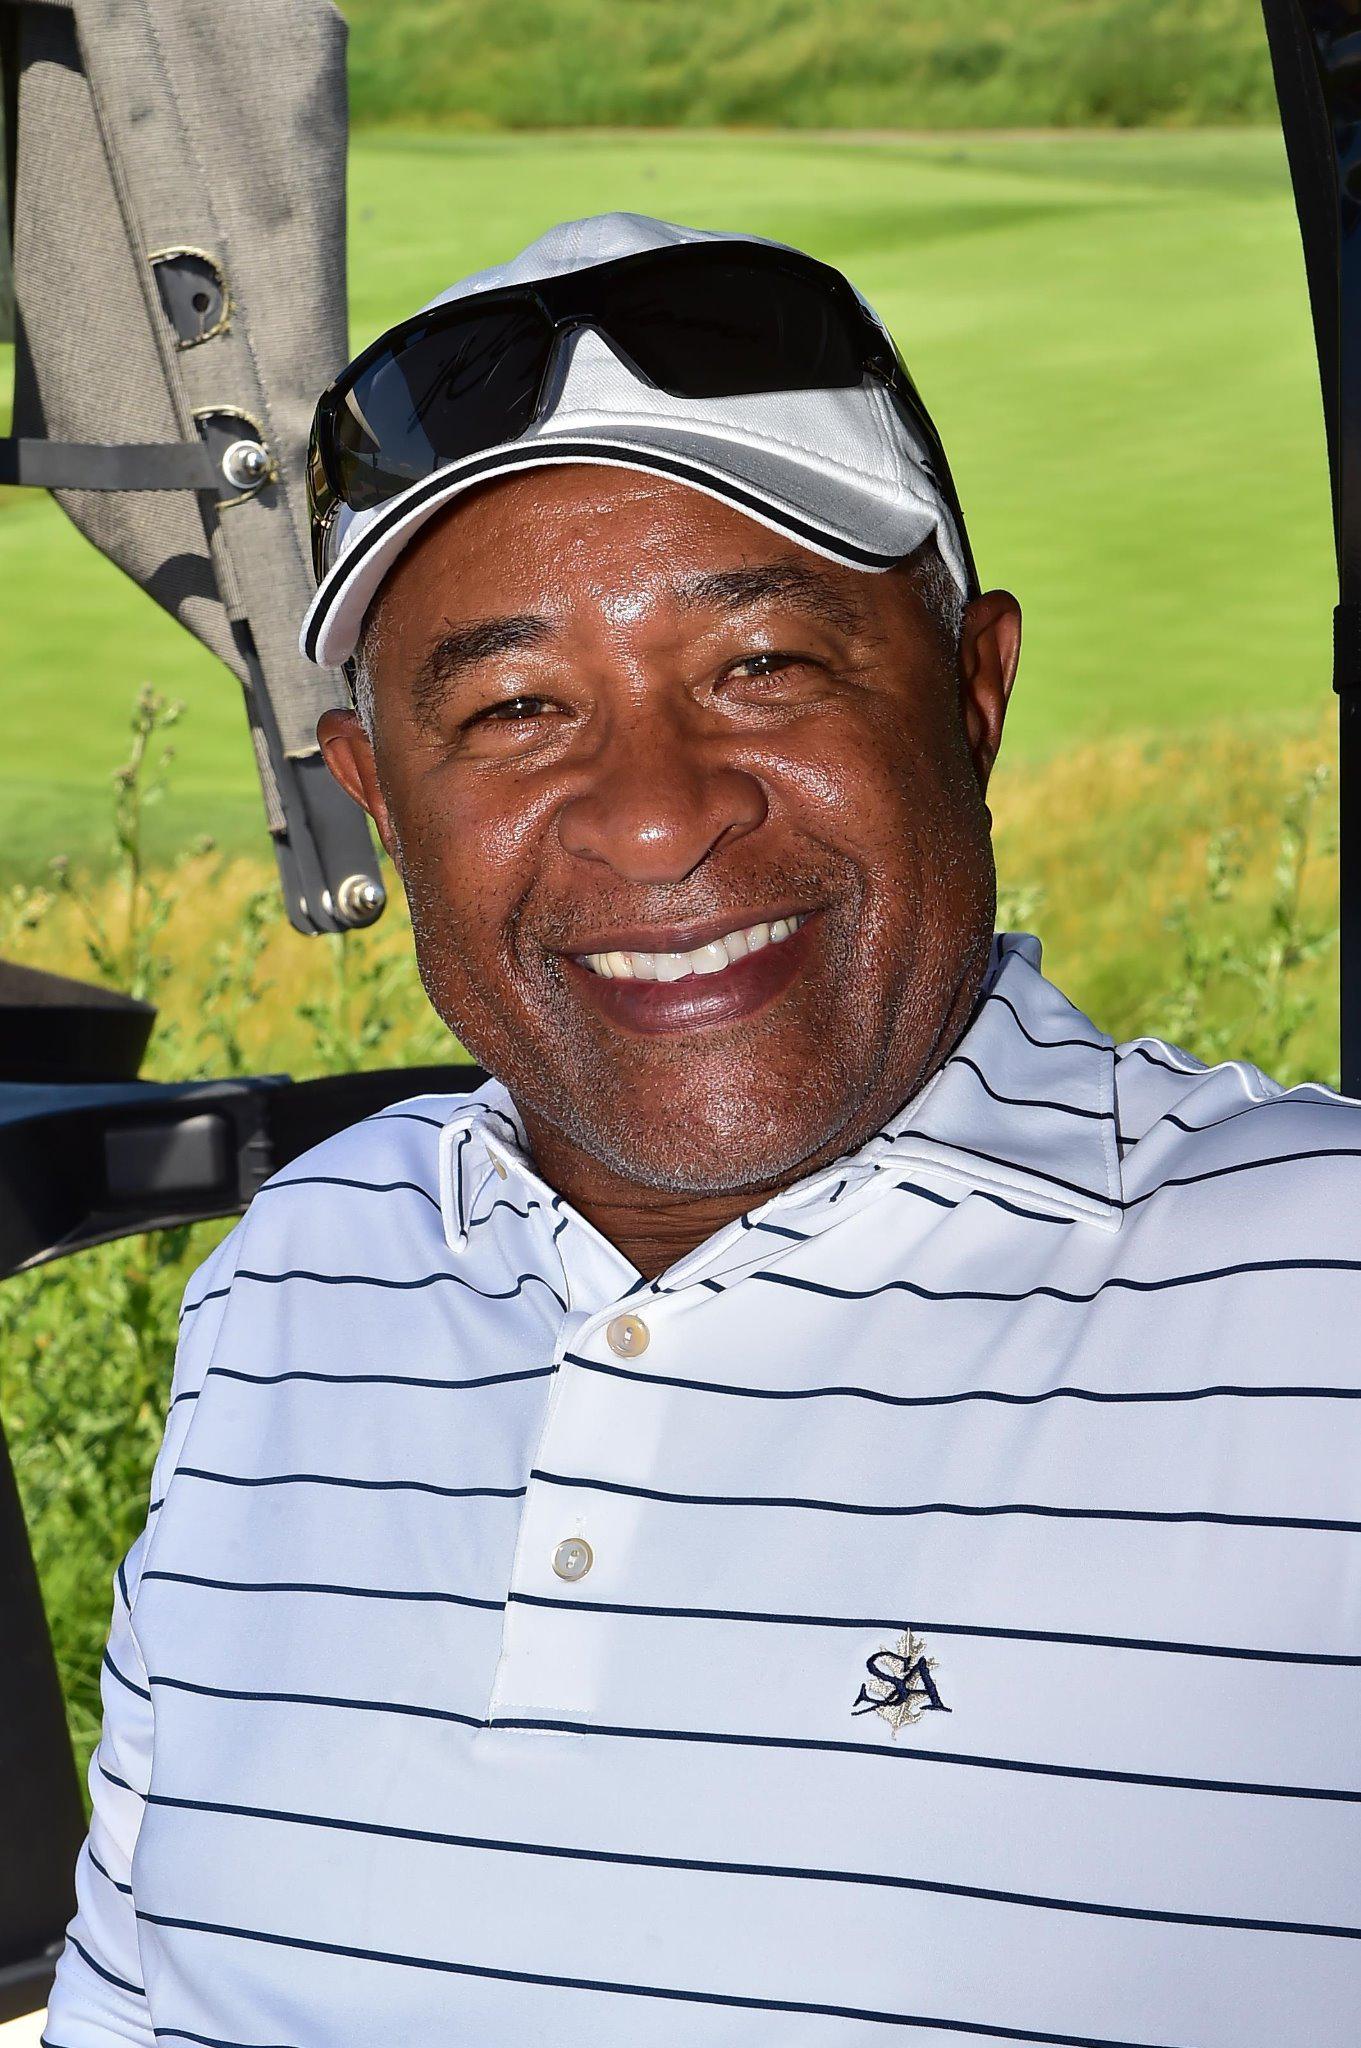 Happy 60th Birthday to our friend Ozzie Smith - see you on the links in 2015! 